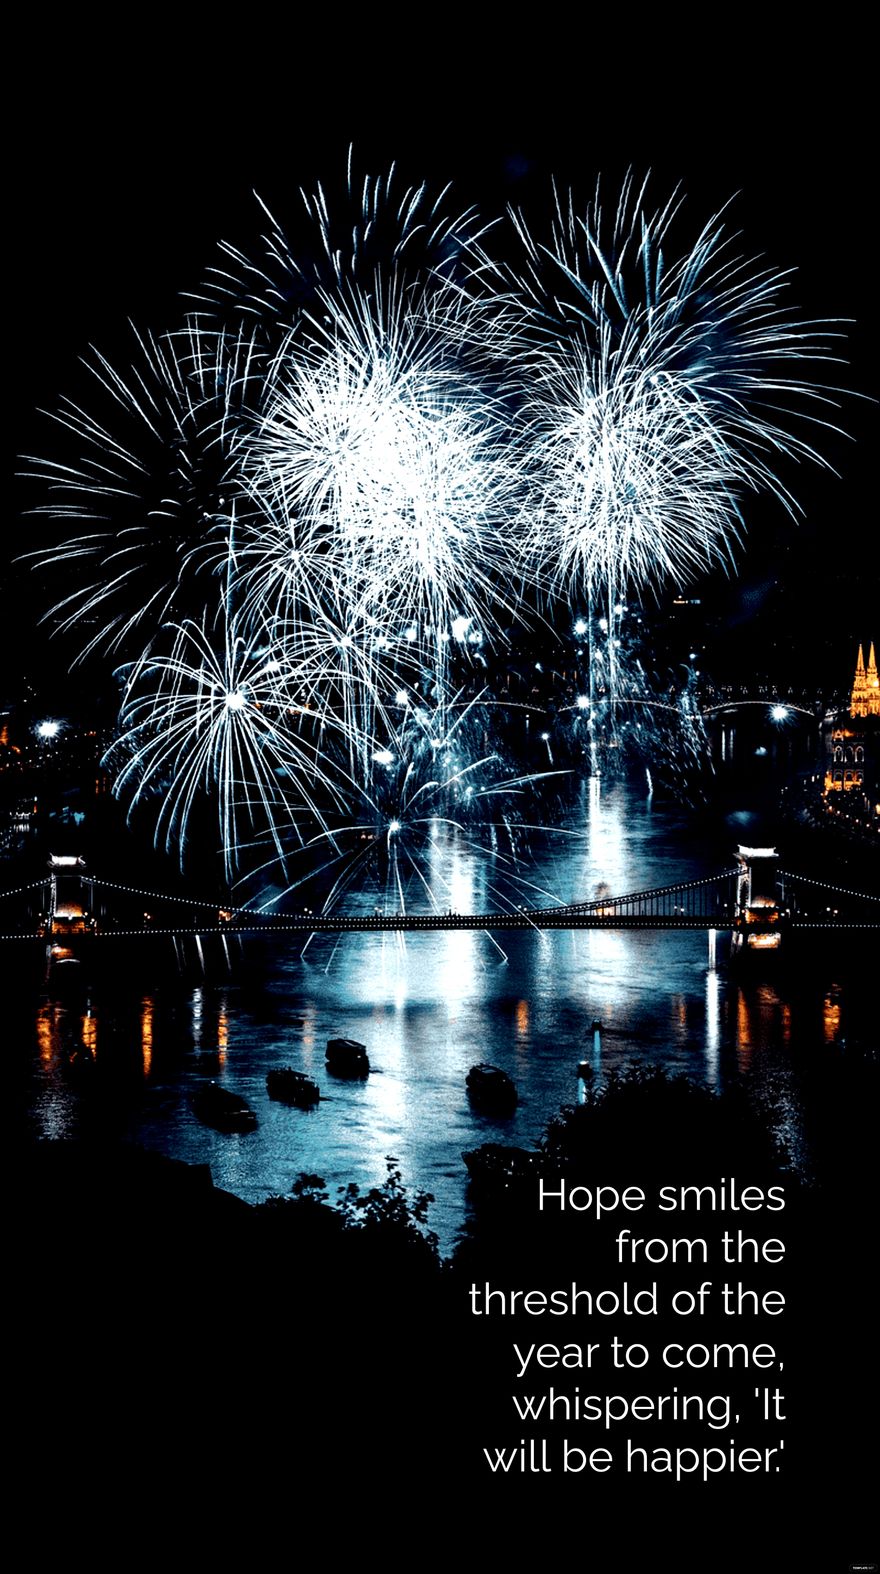 Free Hope smiles from the threshold of the year to come, whispering, 'It will be happier'. in JPEG